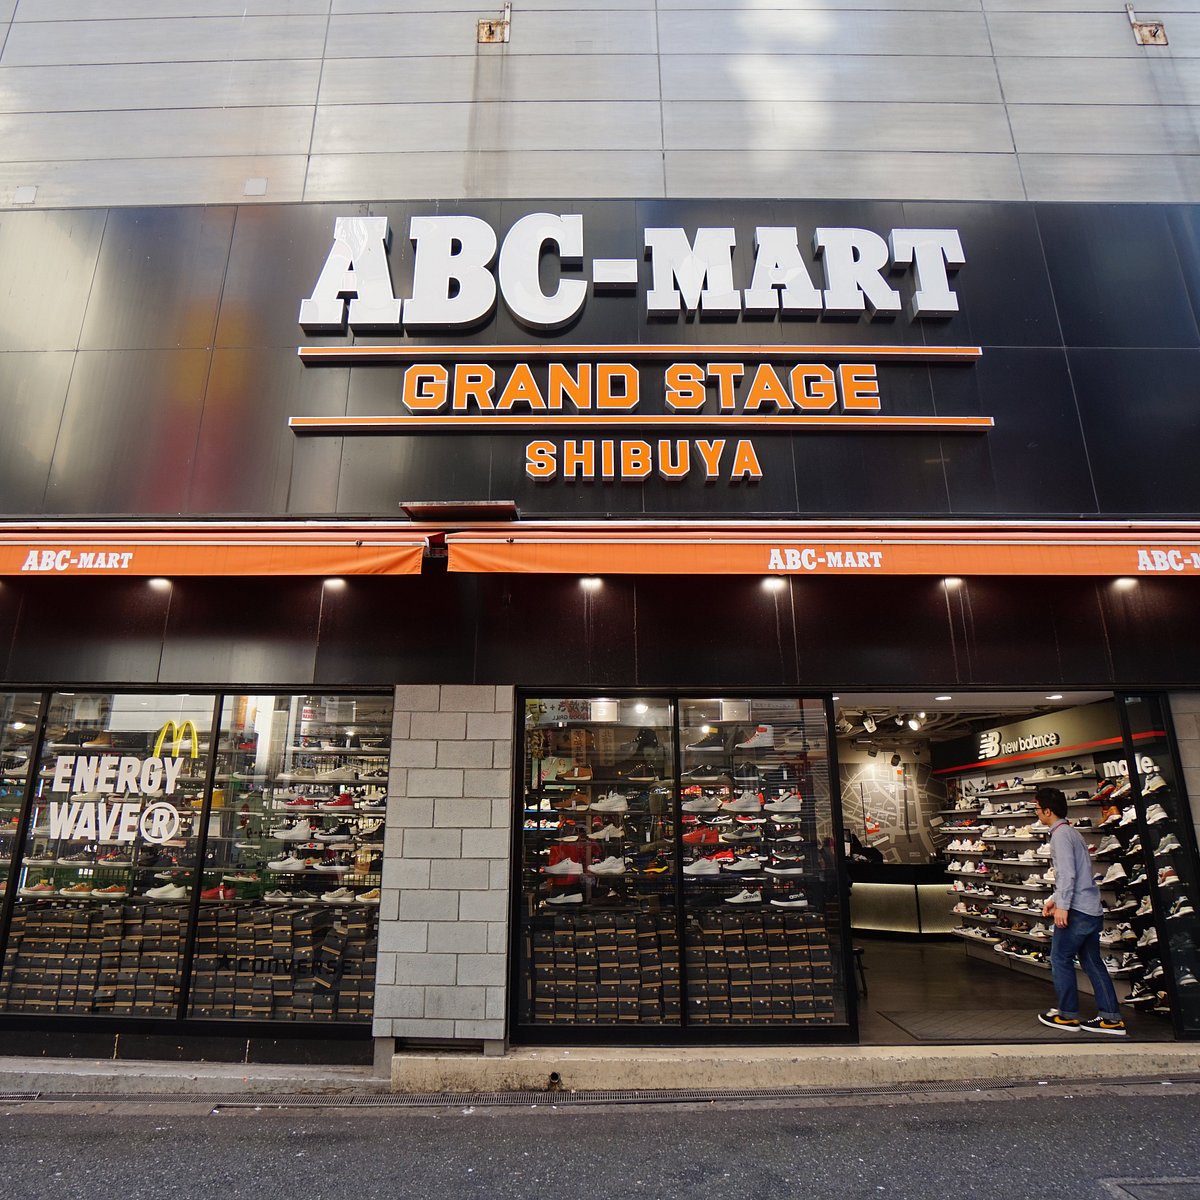 Abc mart grand stage